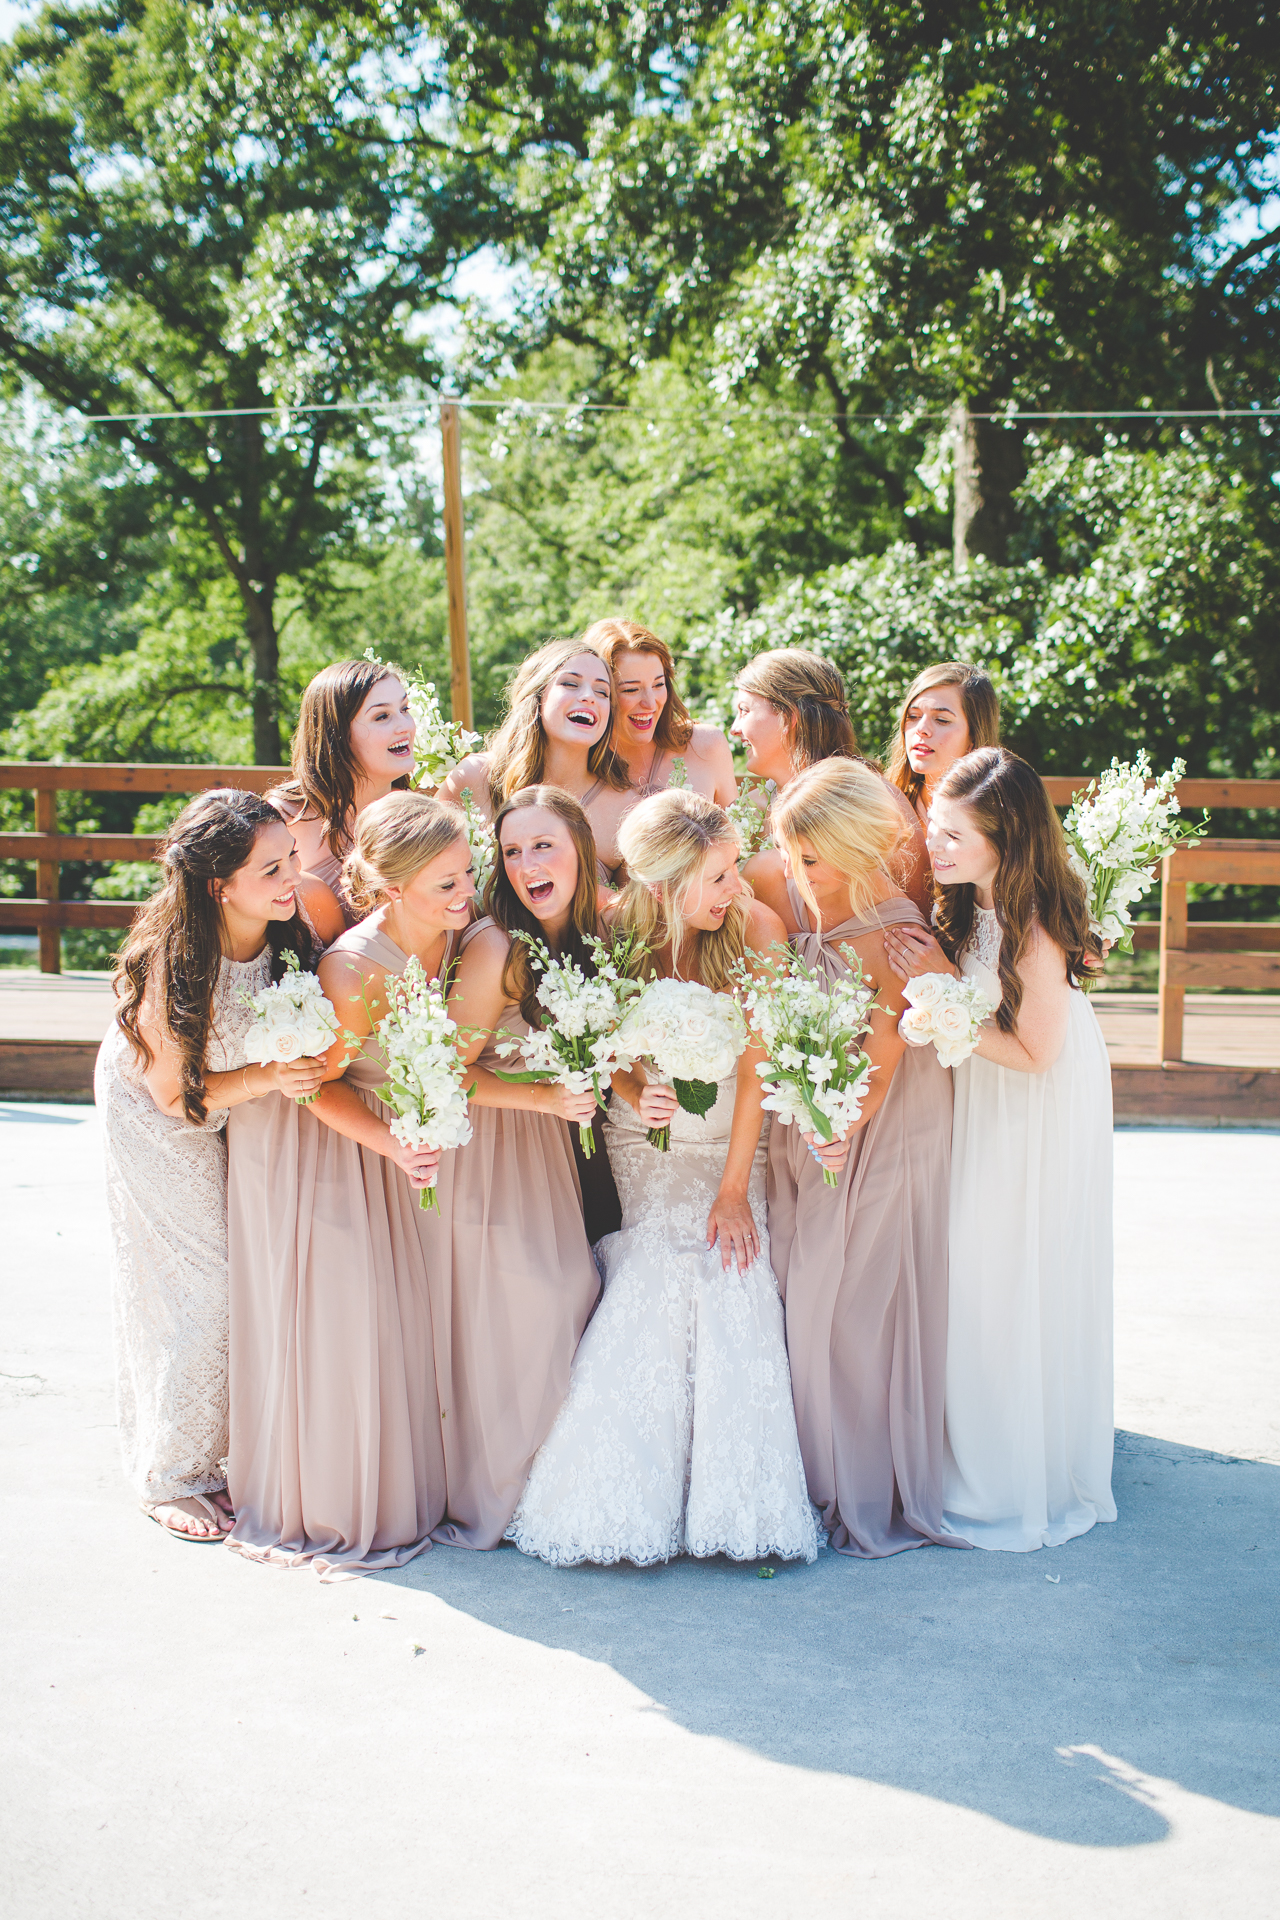 Brides in Neutral Dresses and Simple Flowers